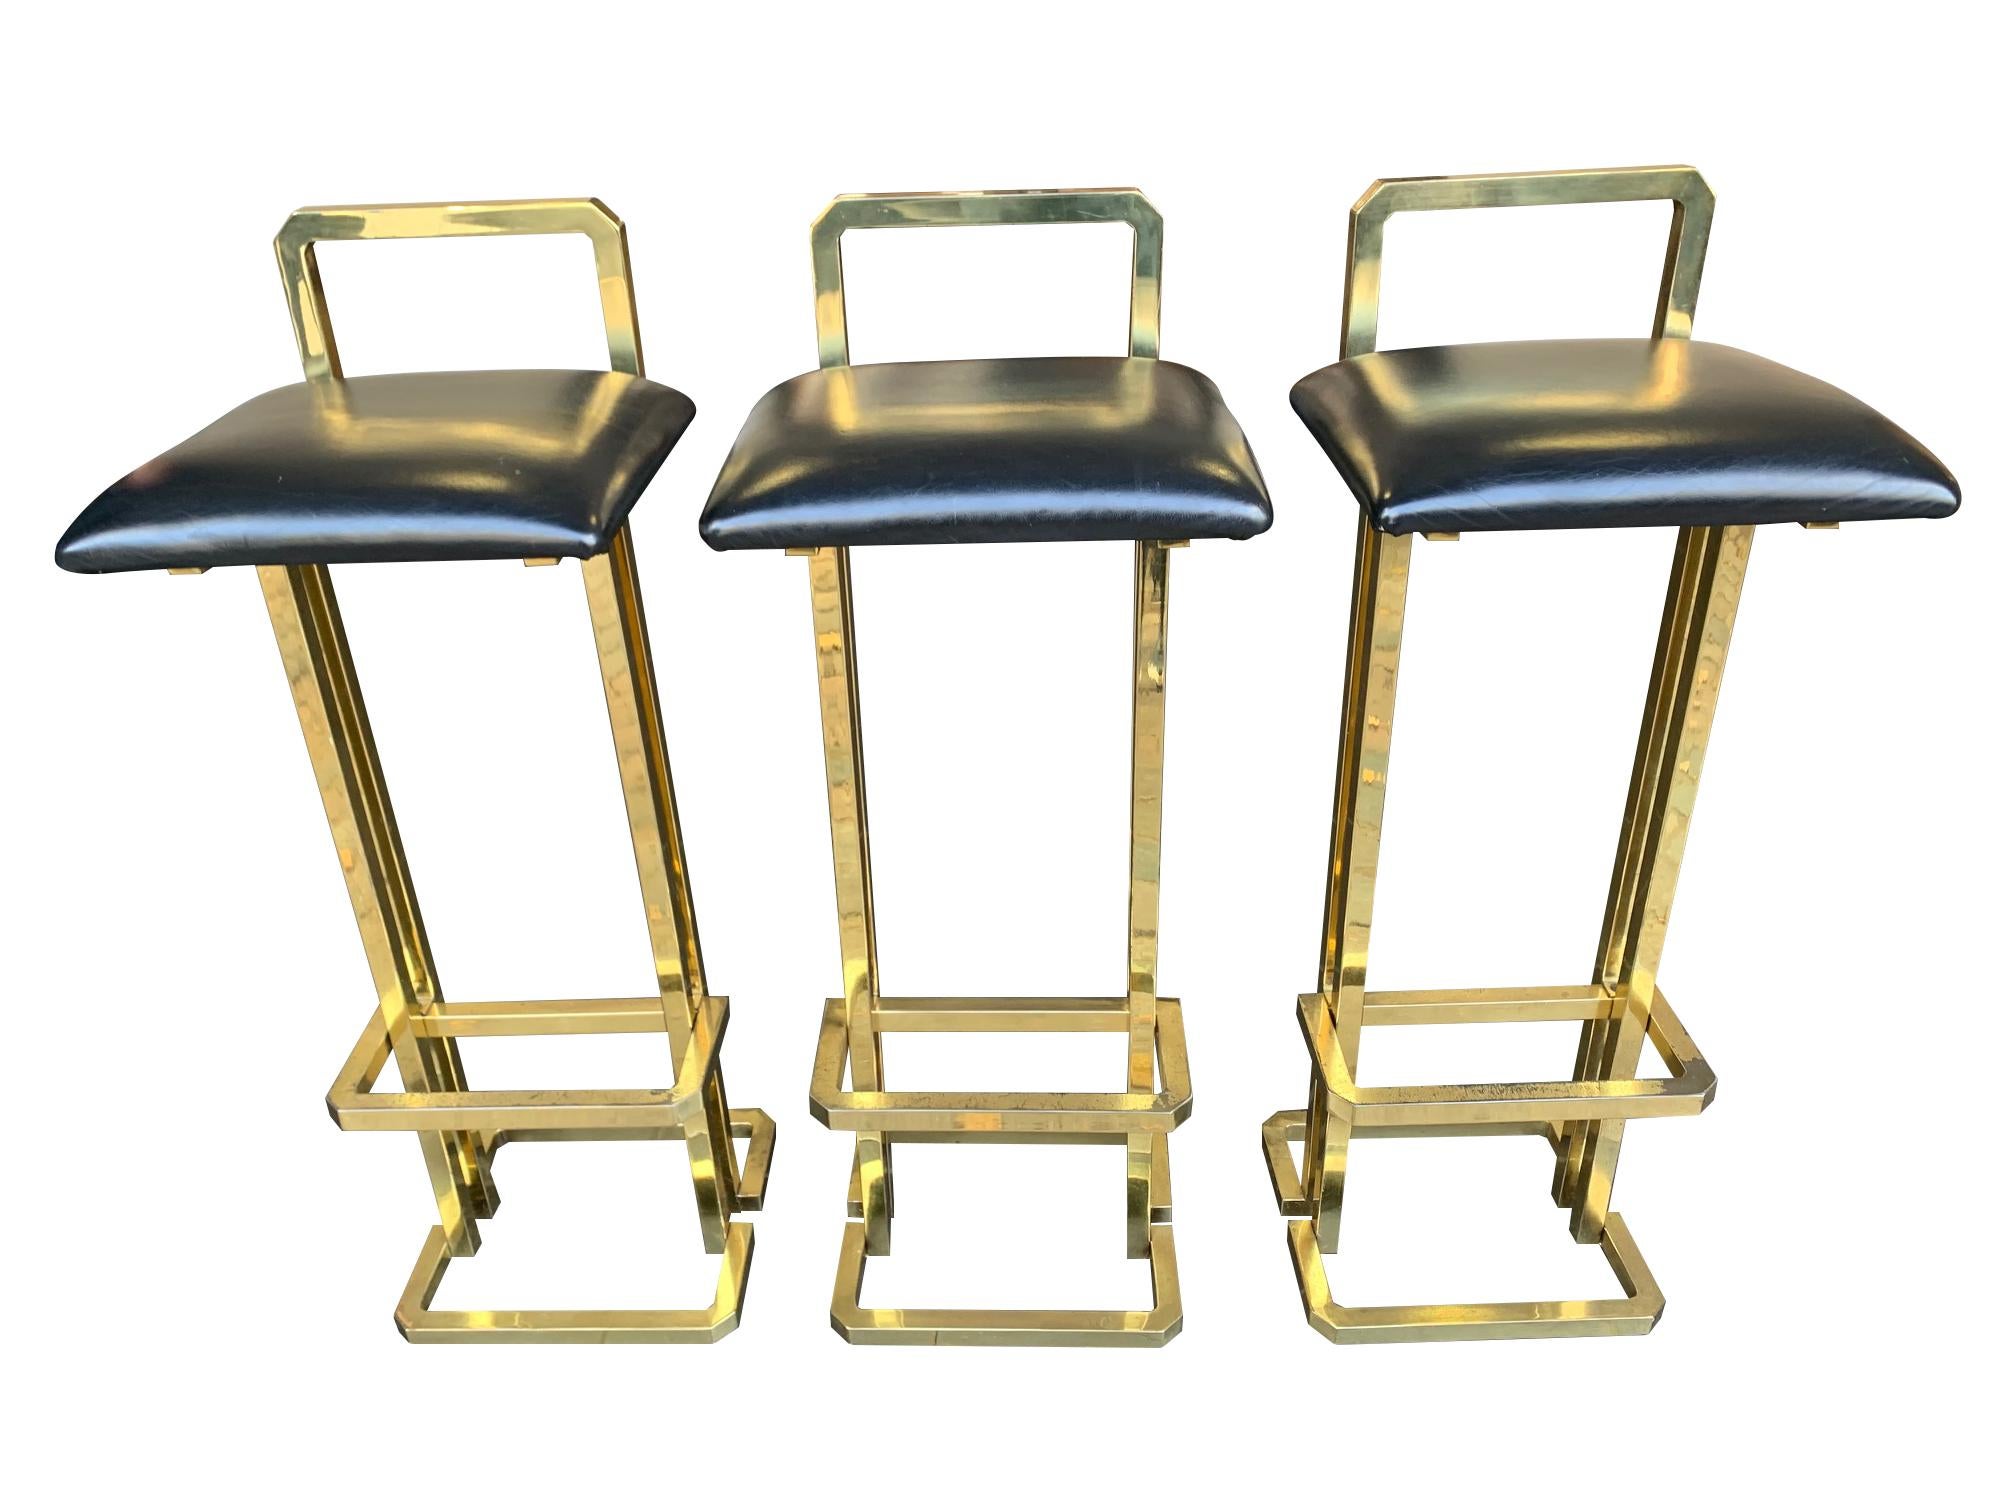 Set of 3 Maison Jansen Style Gilt Metal Stools with Black Leather Seat Pads For Sale 7